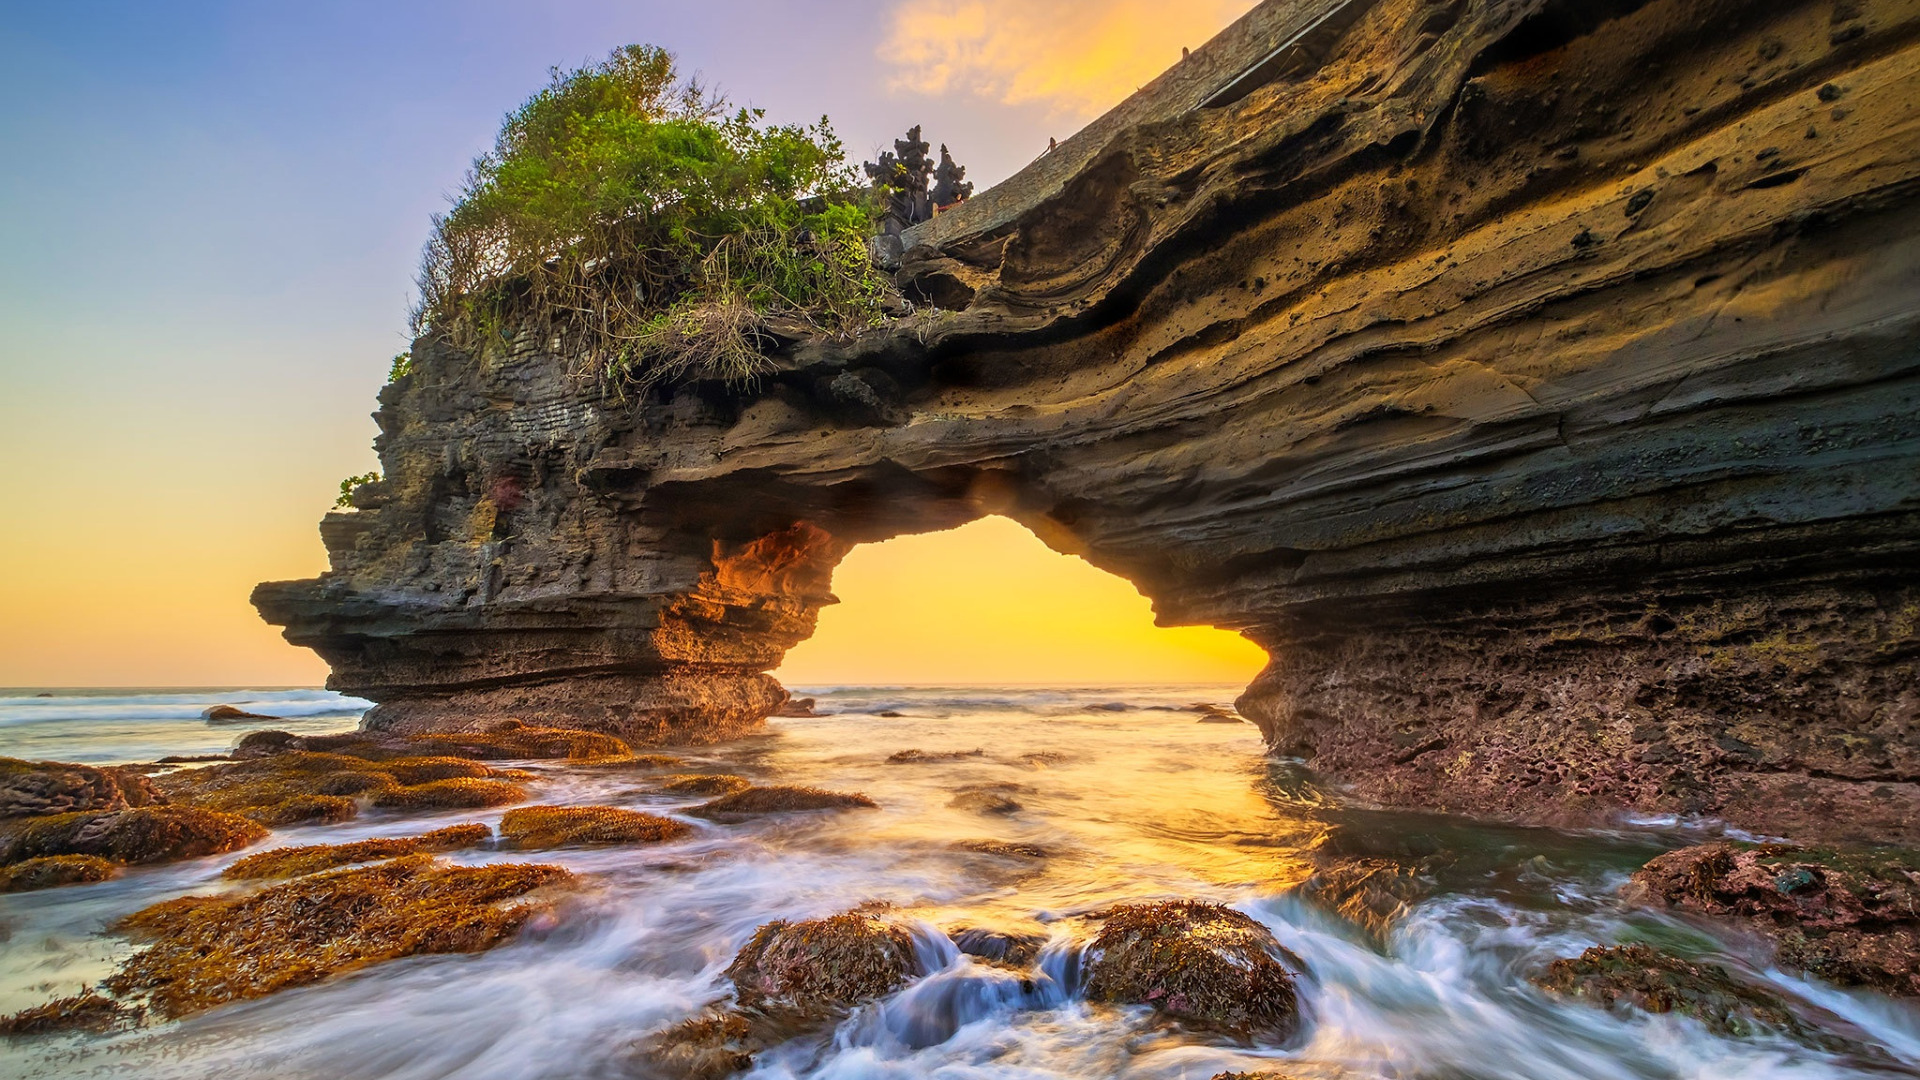 Download wallpaper rock, Indonesia, arch, the island of Bali, Tanah Lot,  section landscapes in resolution 1920x1080